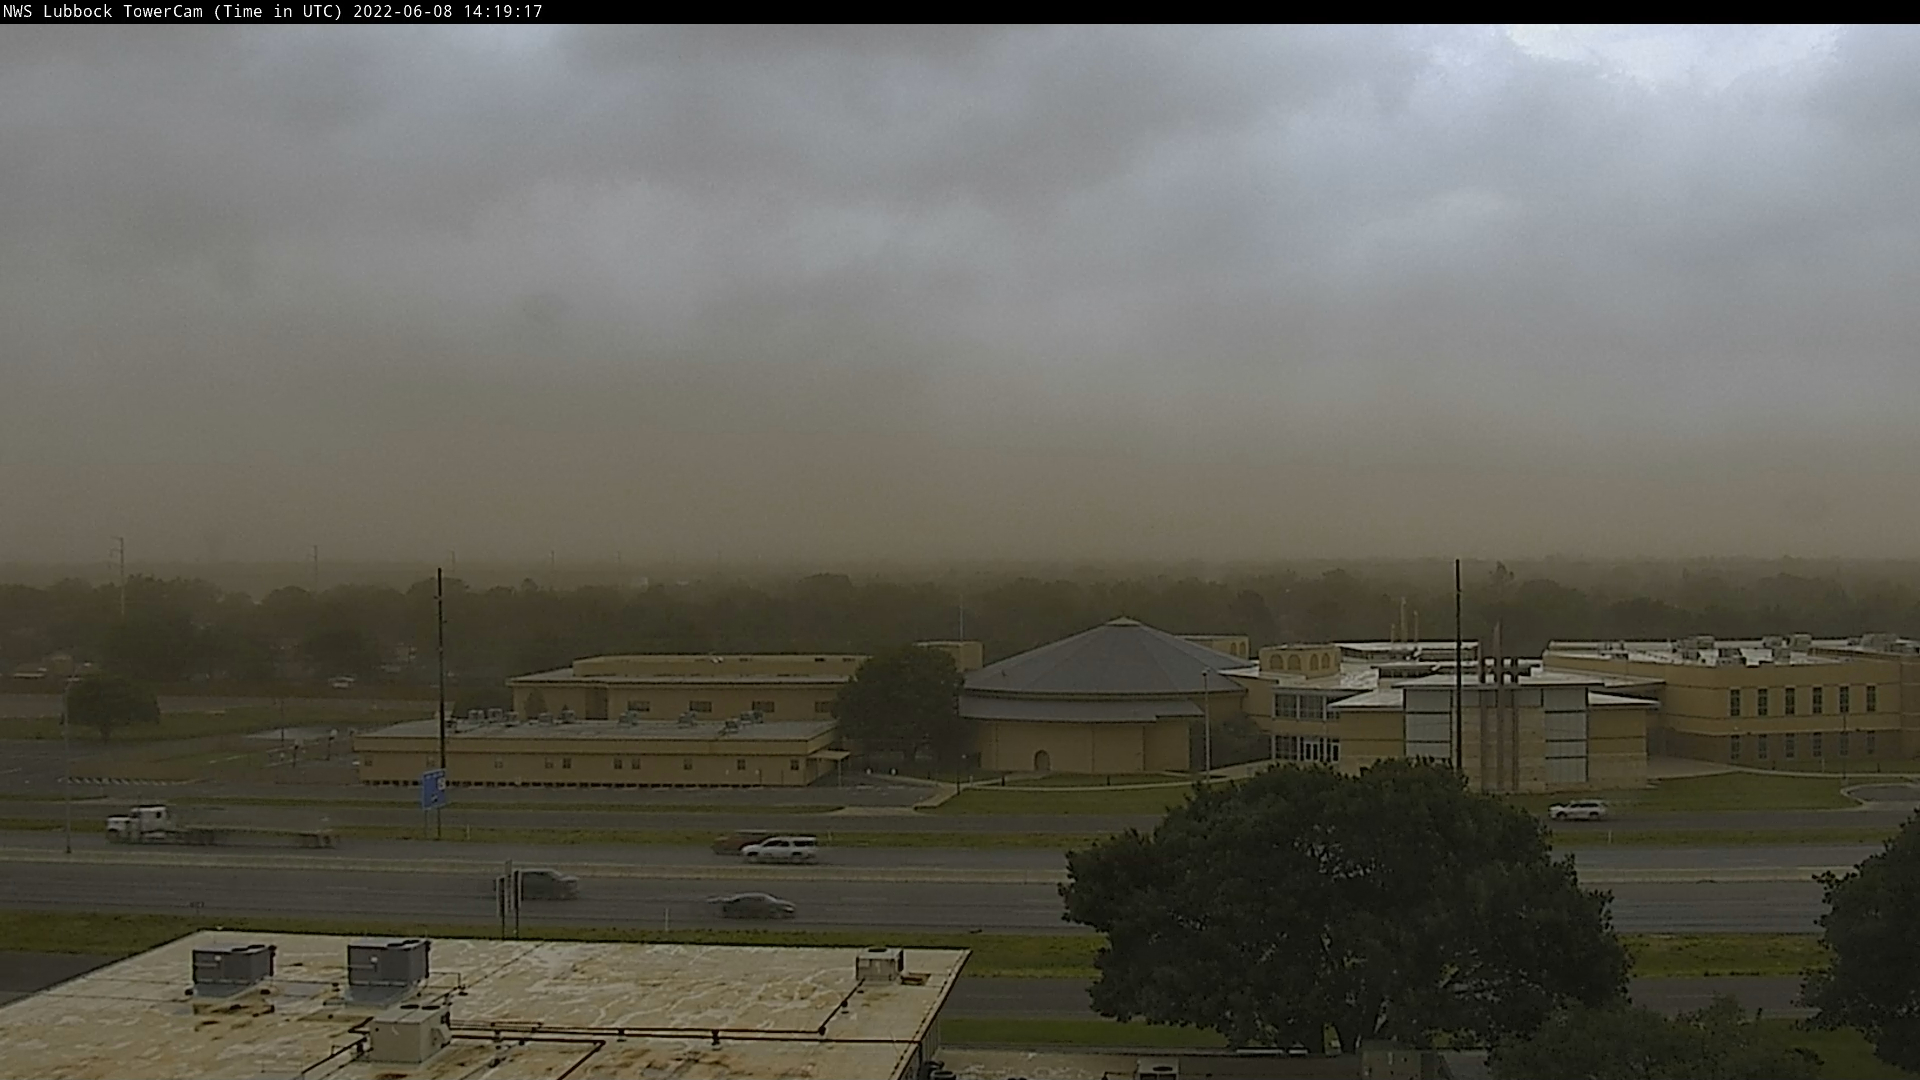 Dusty and windy view from the southern parts of Lubbock captured at 8:19 am on 8 June 2022.